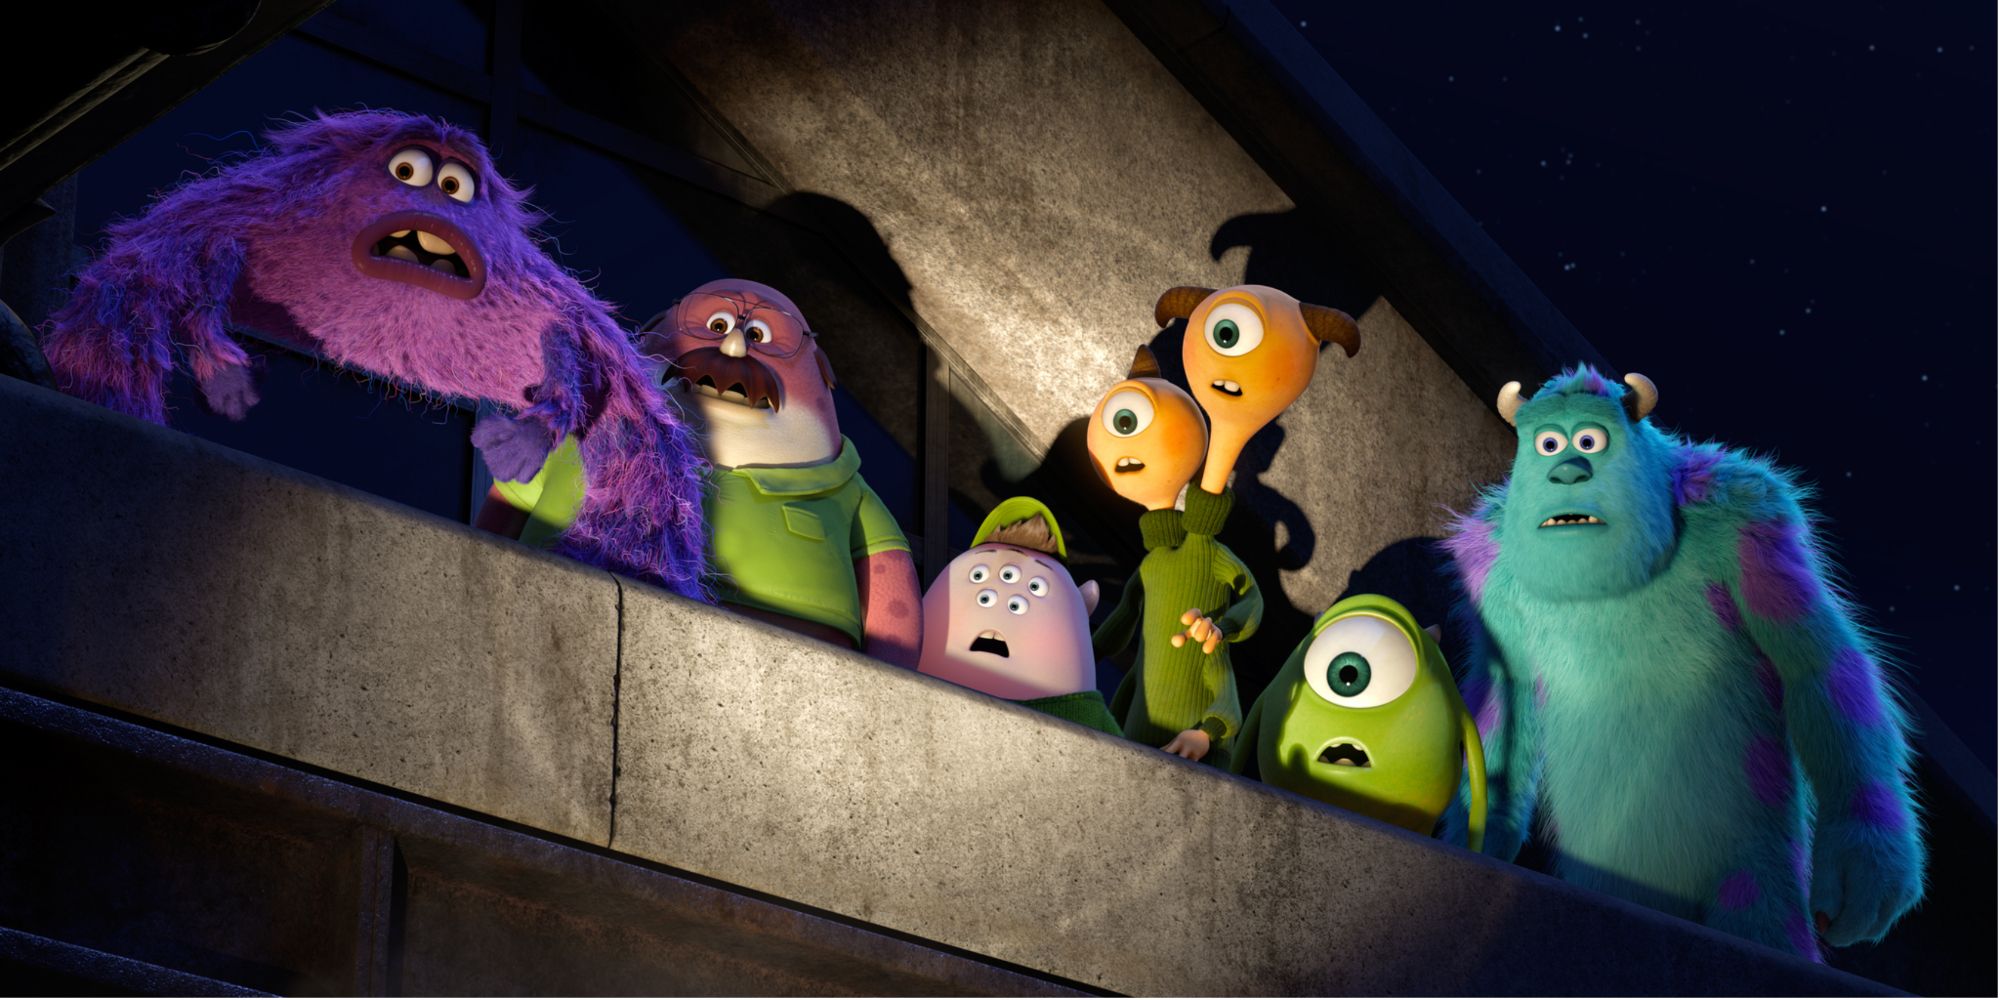 Mike and Sully with the Oozma Kappa crew in Monsters University